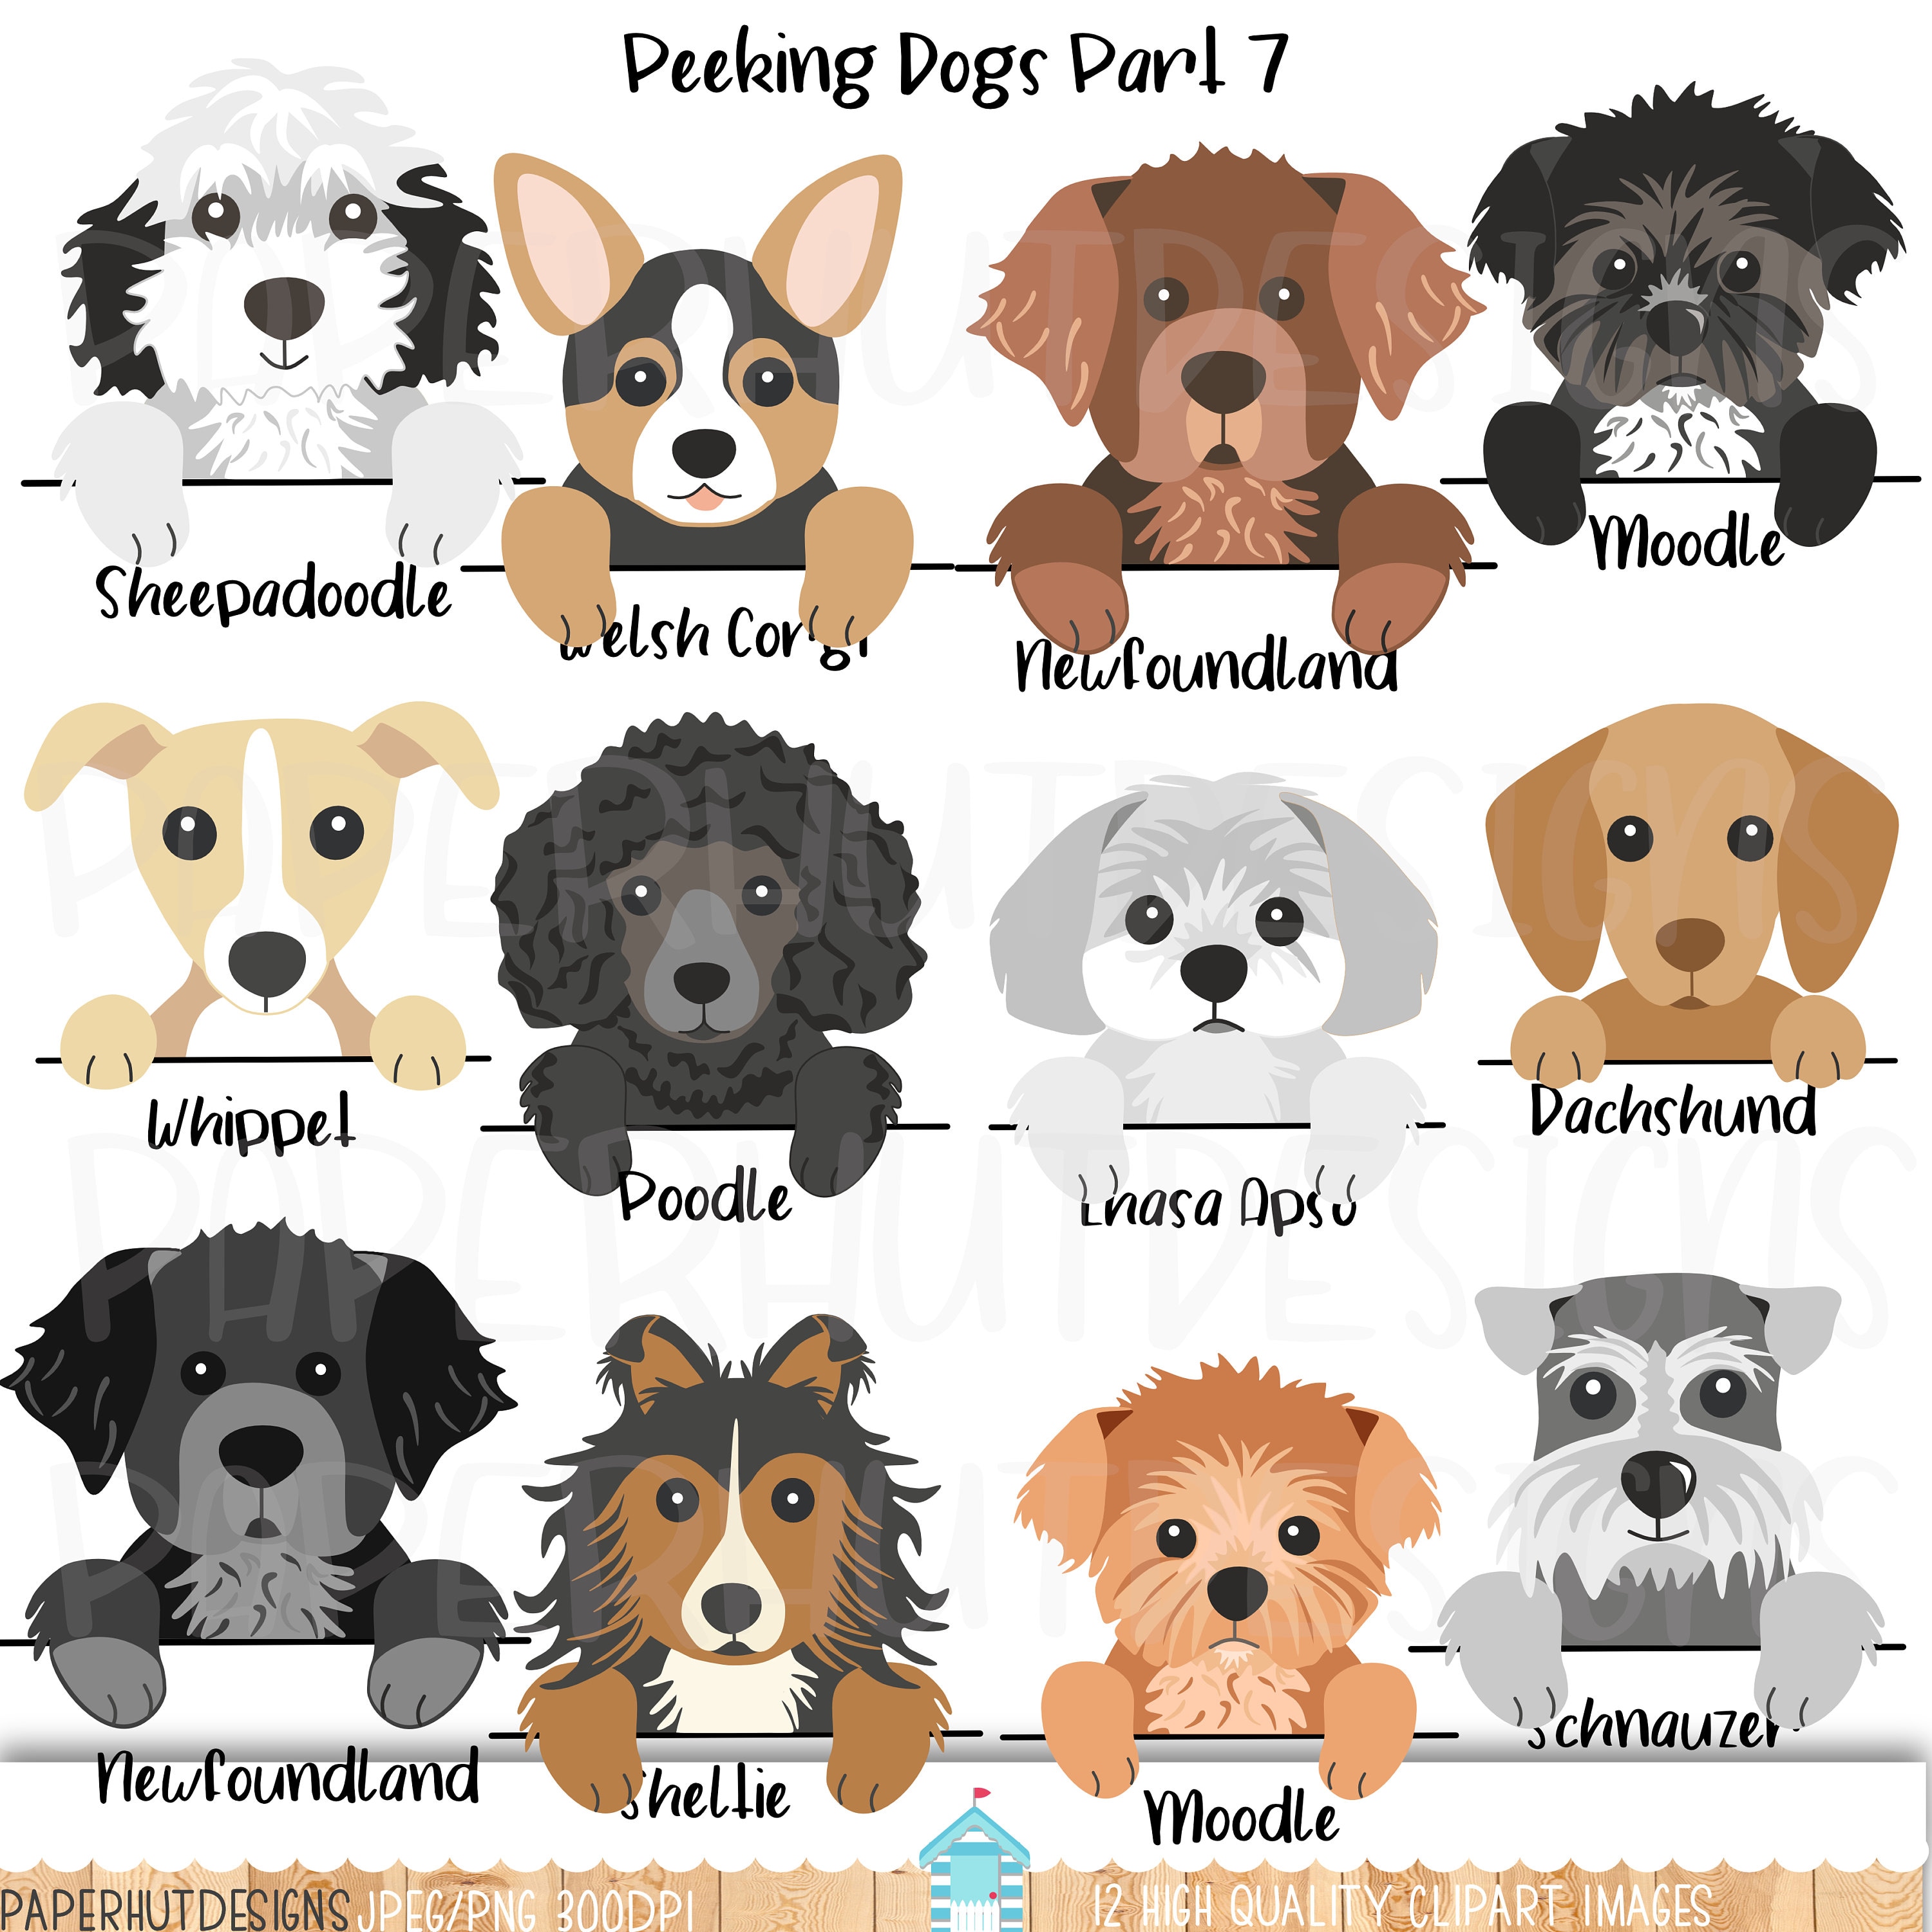 19 Sheepadoodles ideas  cute dogs, cute puppies, puppies